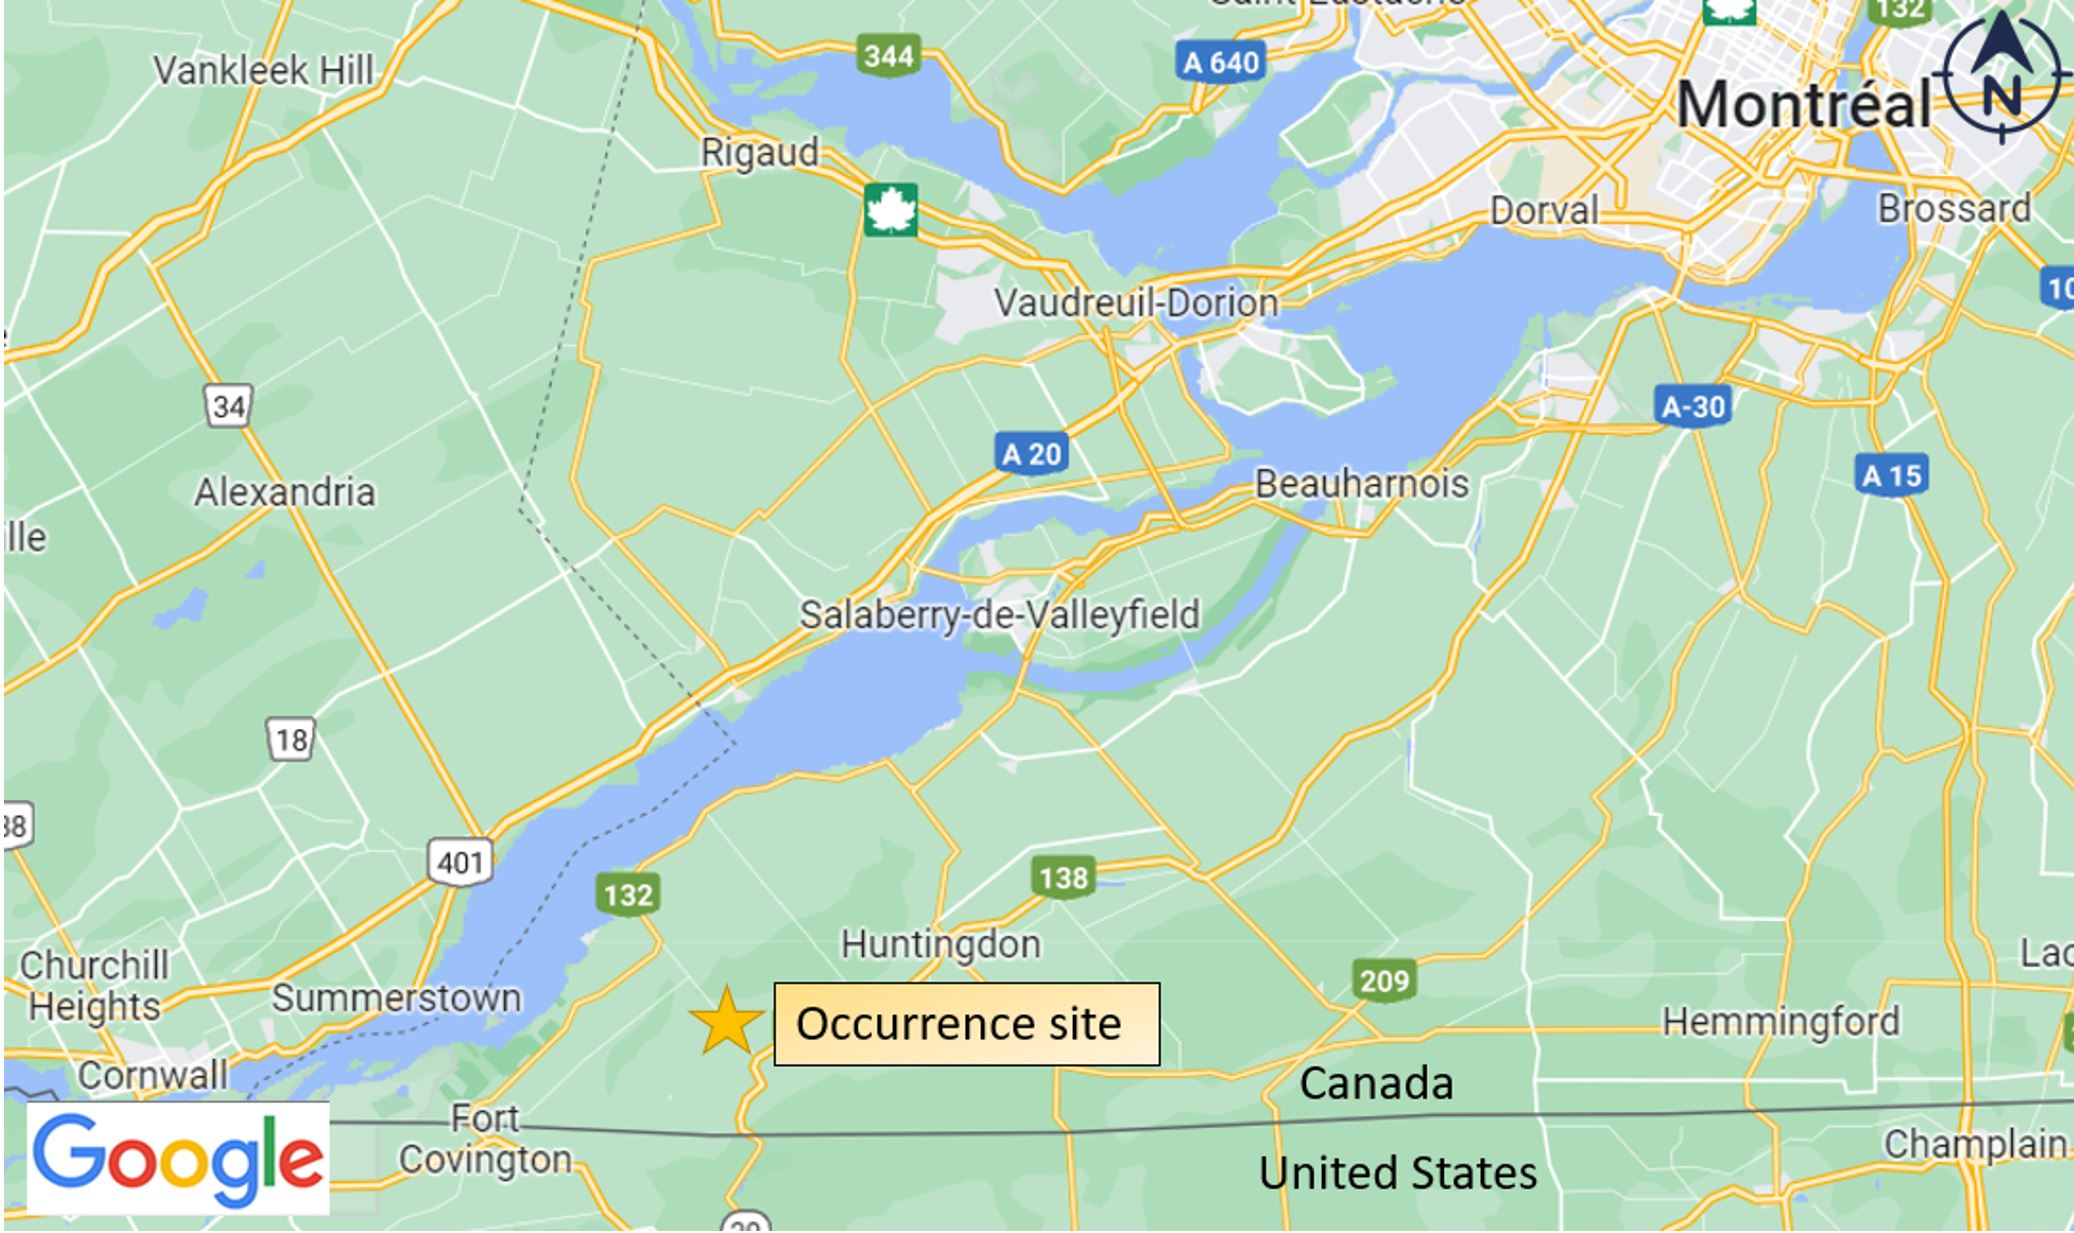 Occurrence site (Source: Google Maps, with TSB annotations)